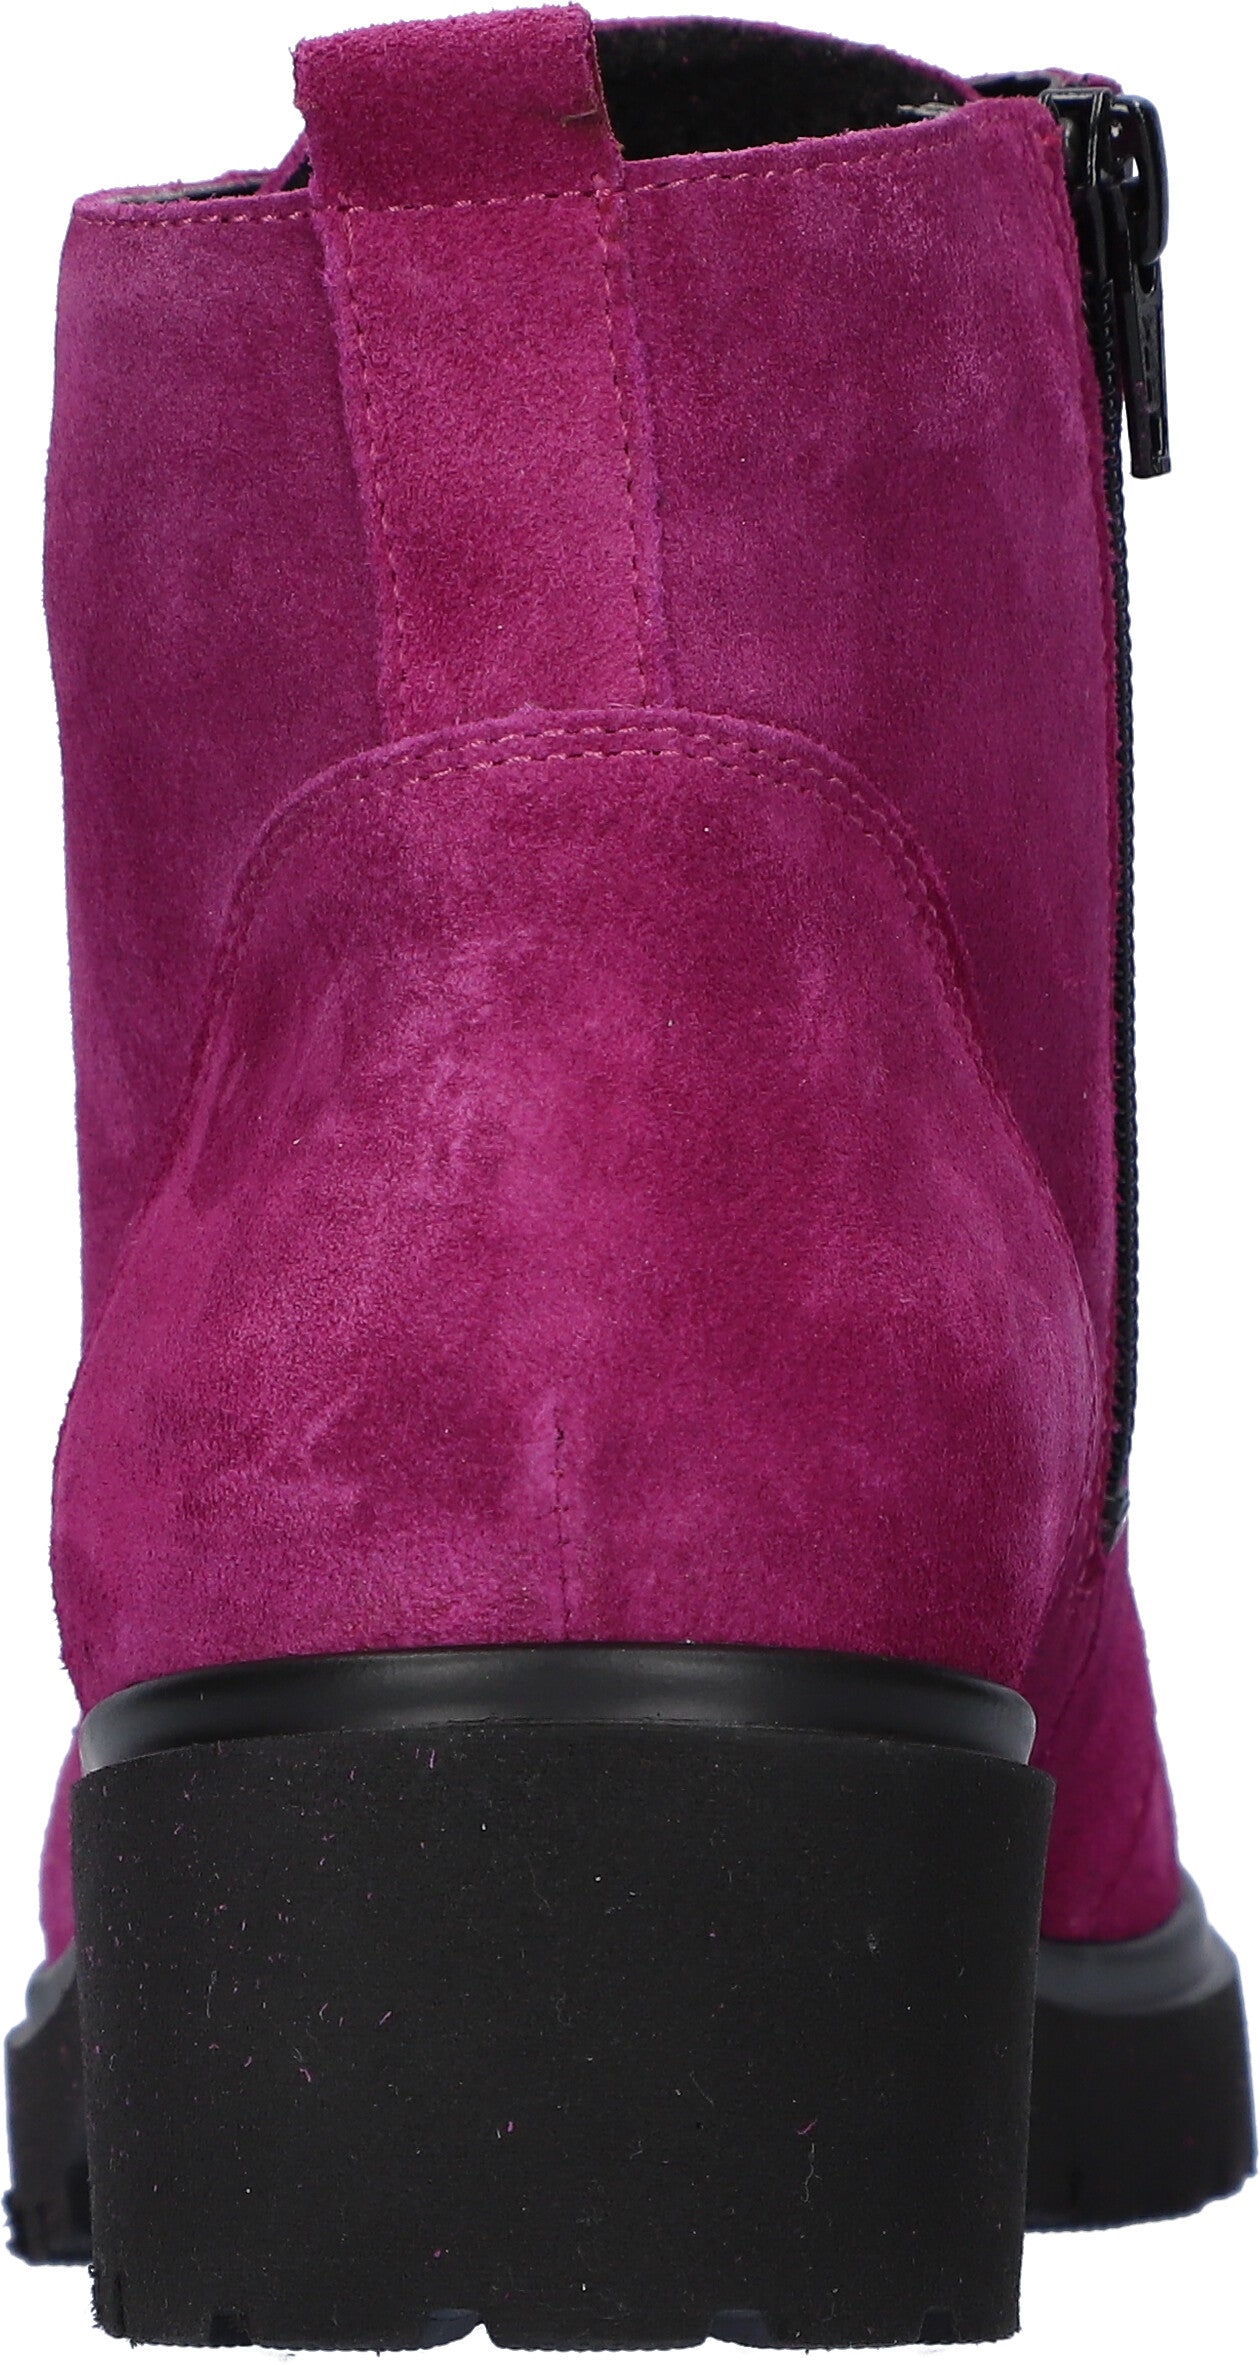 Waldlaufer 716807 195 228 H-Luise Ladies Fuchsia Suede Arch Support Zip & Lace Ankle Boots